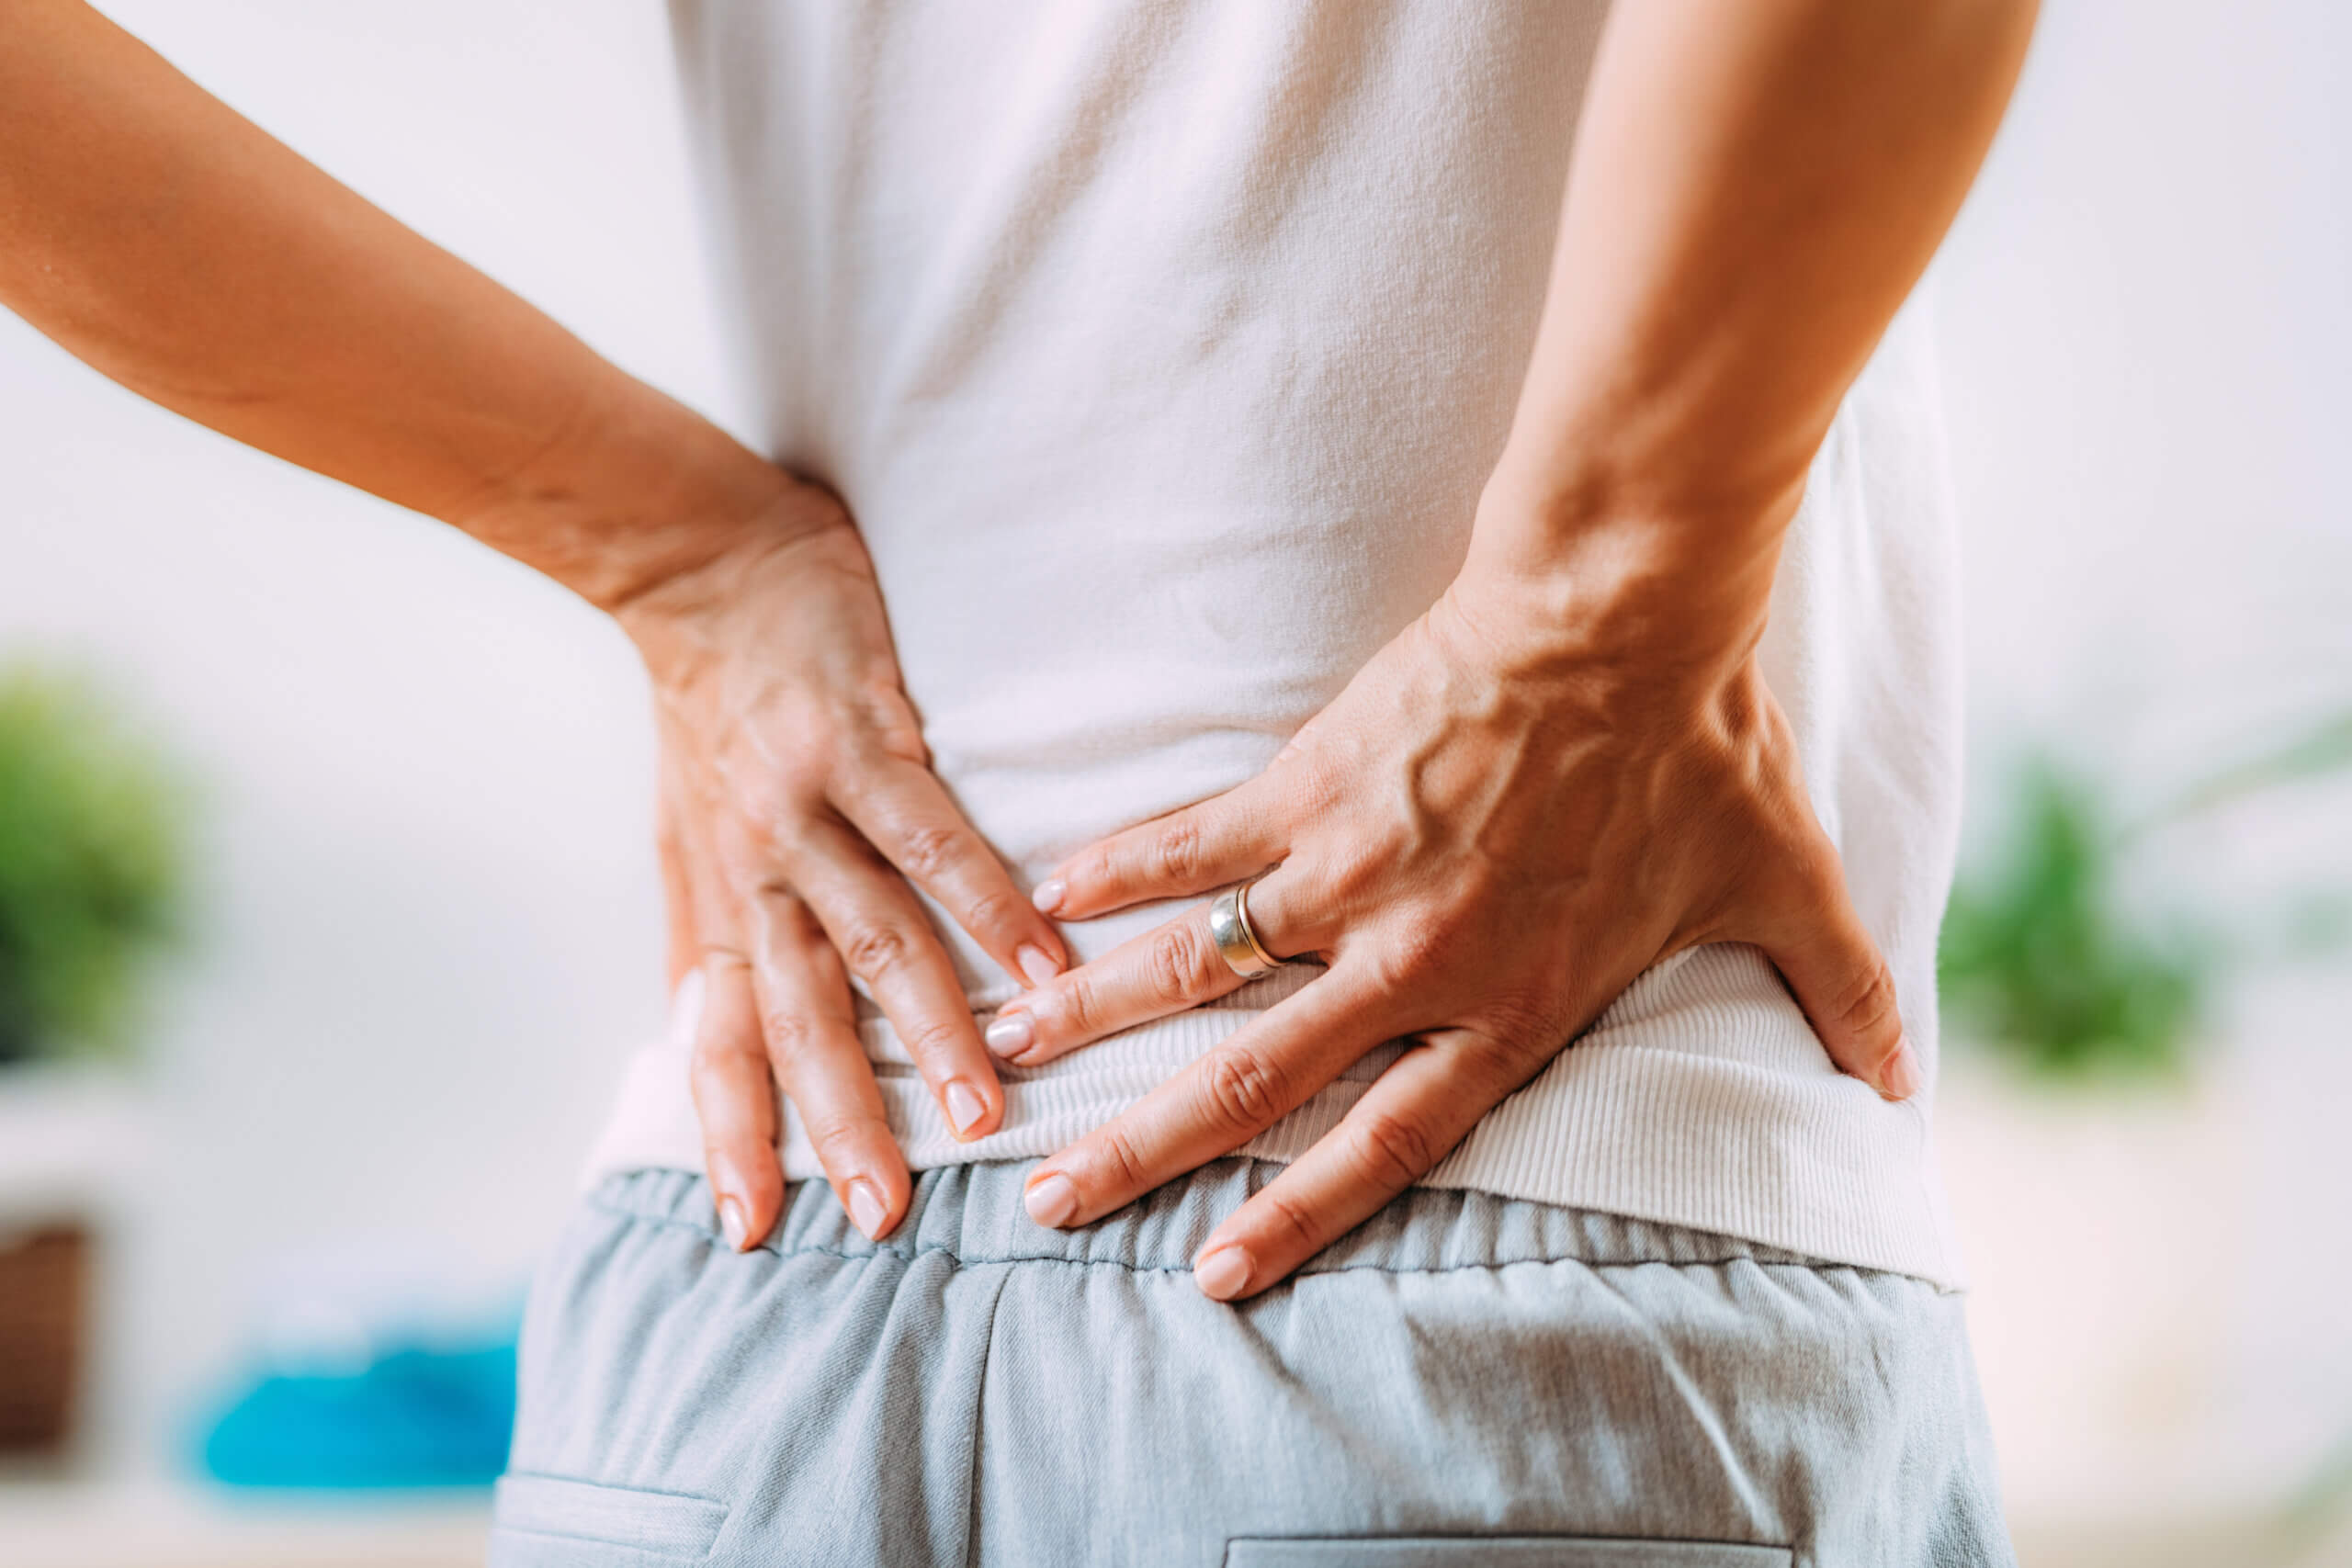 Living With Sciatica? Say Goodbye to Chronic Pain With This Secret!